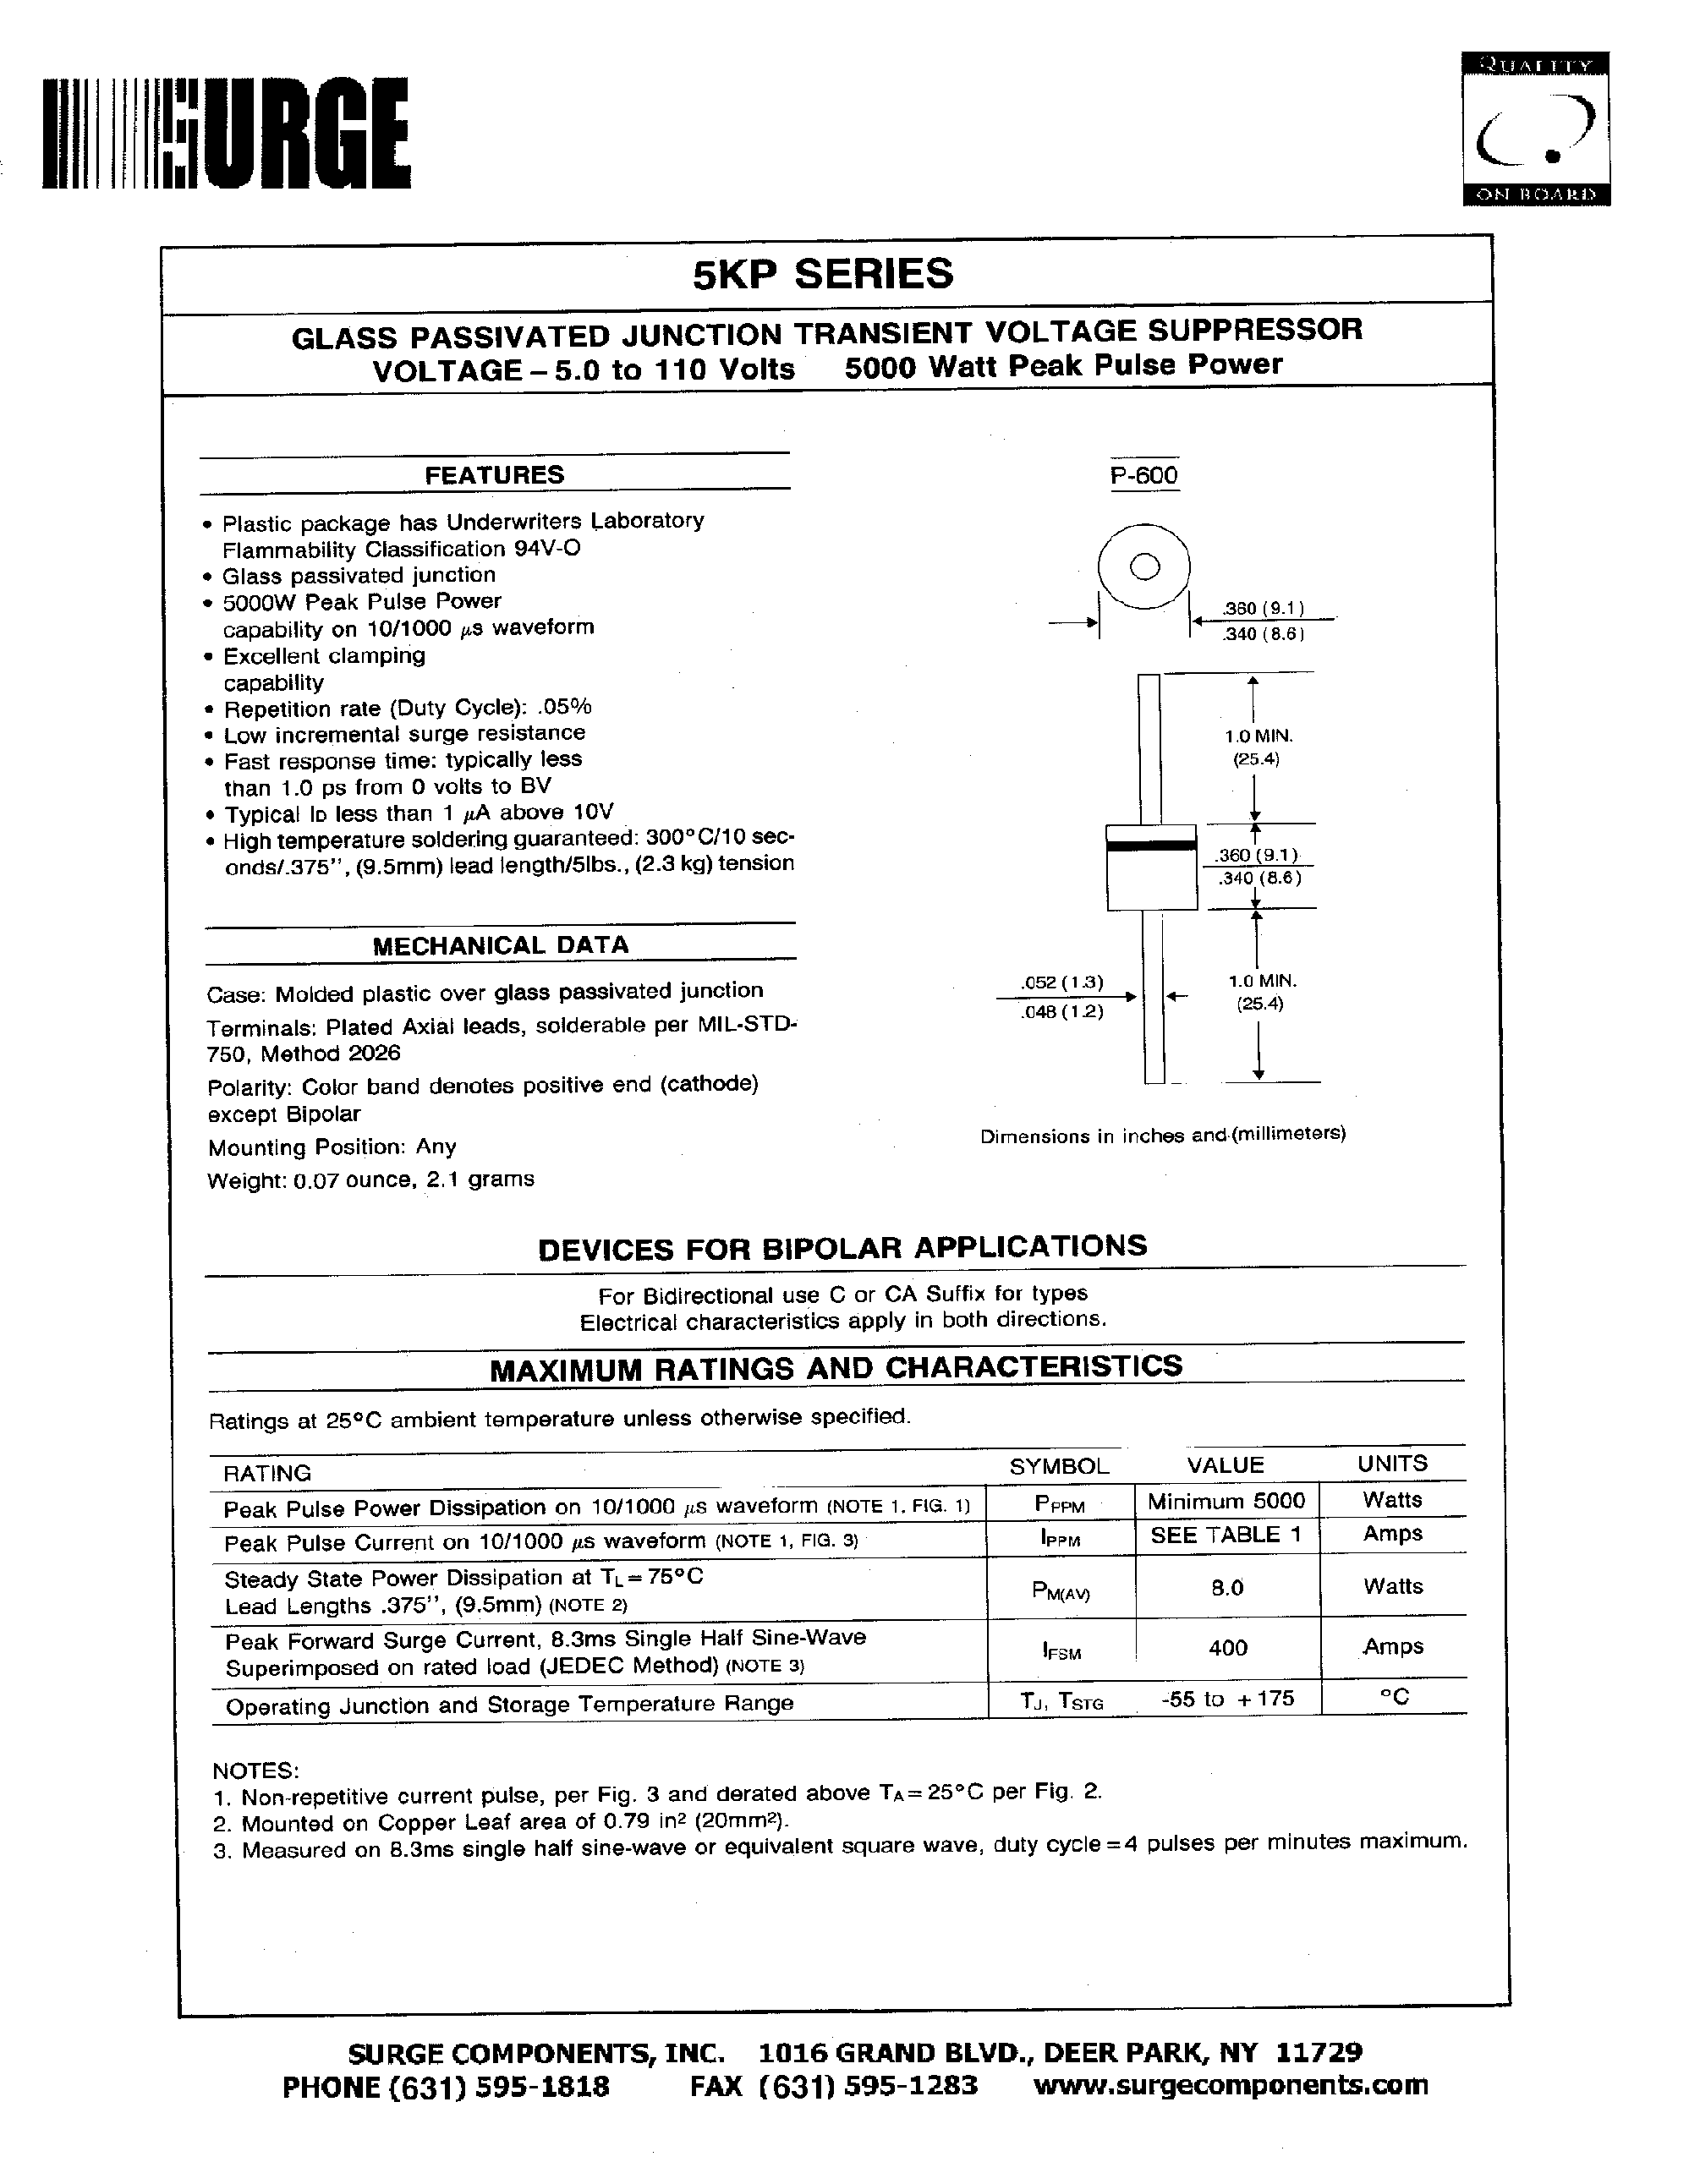 Datasheet 5KP8.5 - GLASS PASSIVATED JUNCTION TRANSIENT VOLTAGE SUPPRESSOR VOLTAGE-5.0 to 110 Volts page 1